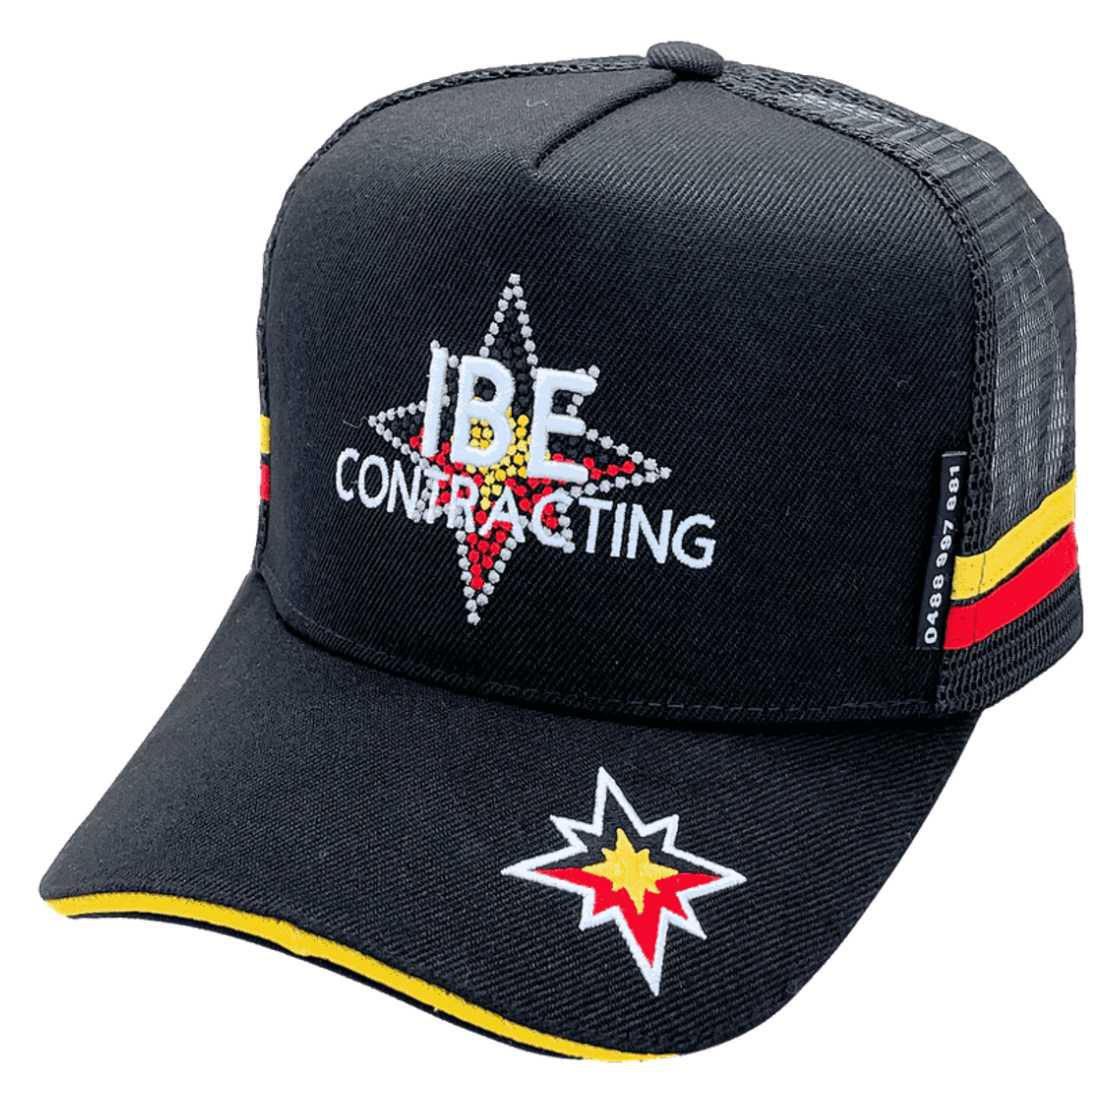 IBE Contracting Civil Engineering Construction NT Power Aussie Trucker Hat